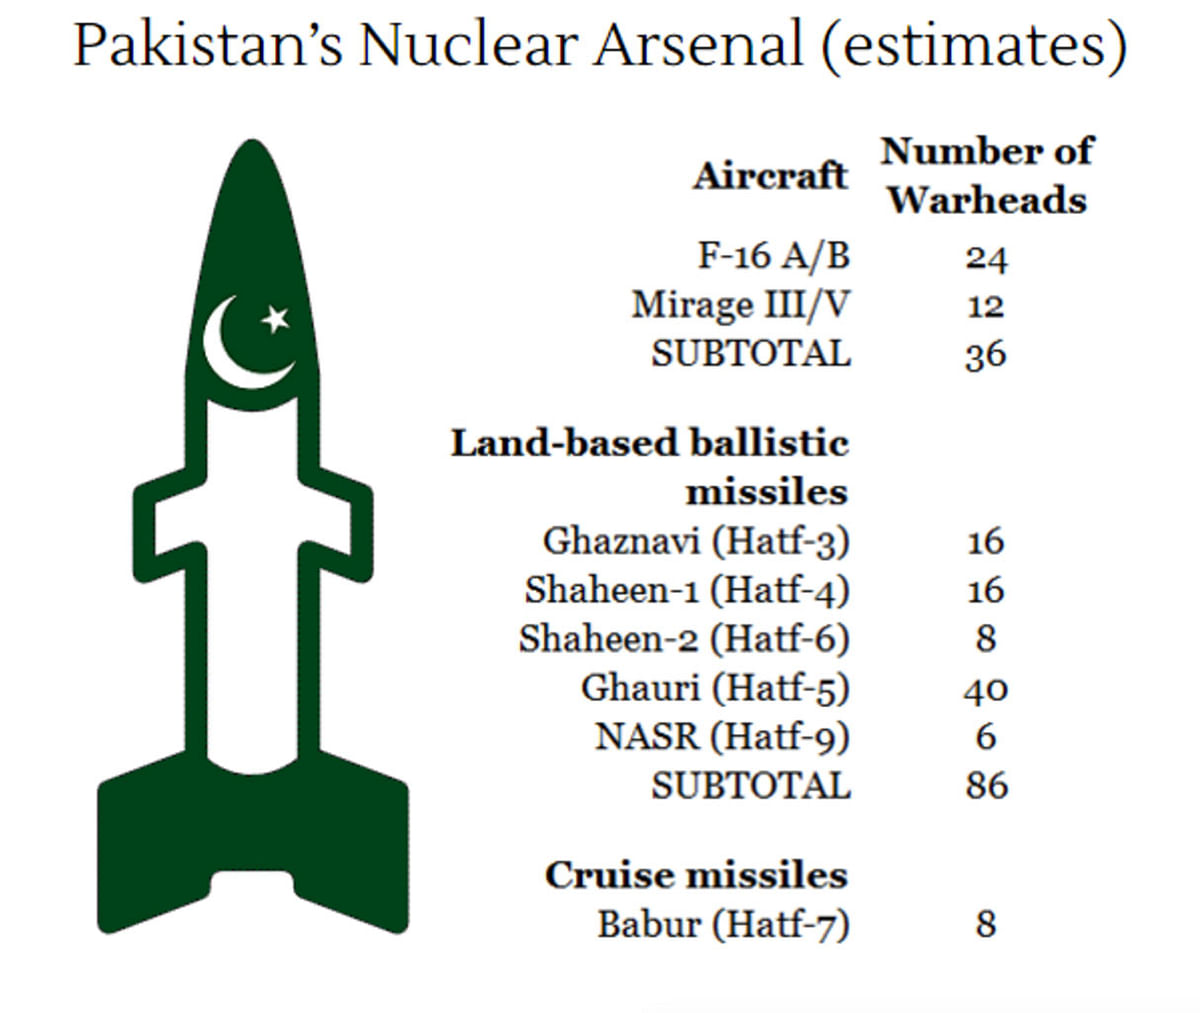 If India & Pakistan fought a war with half of their combined arsenal, 21 million people will die in the first week.